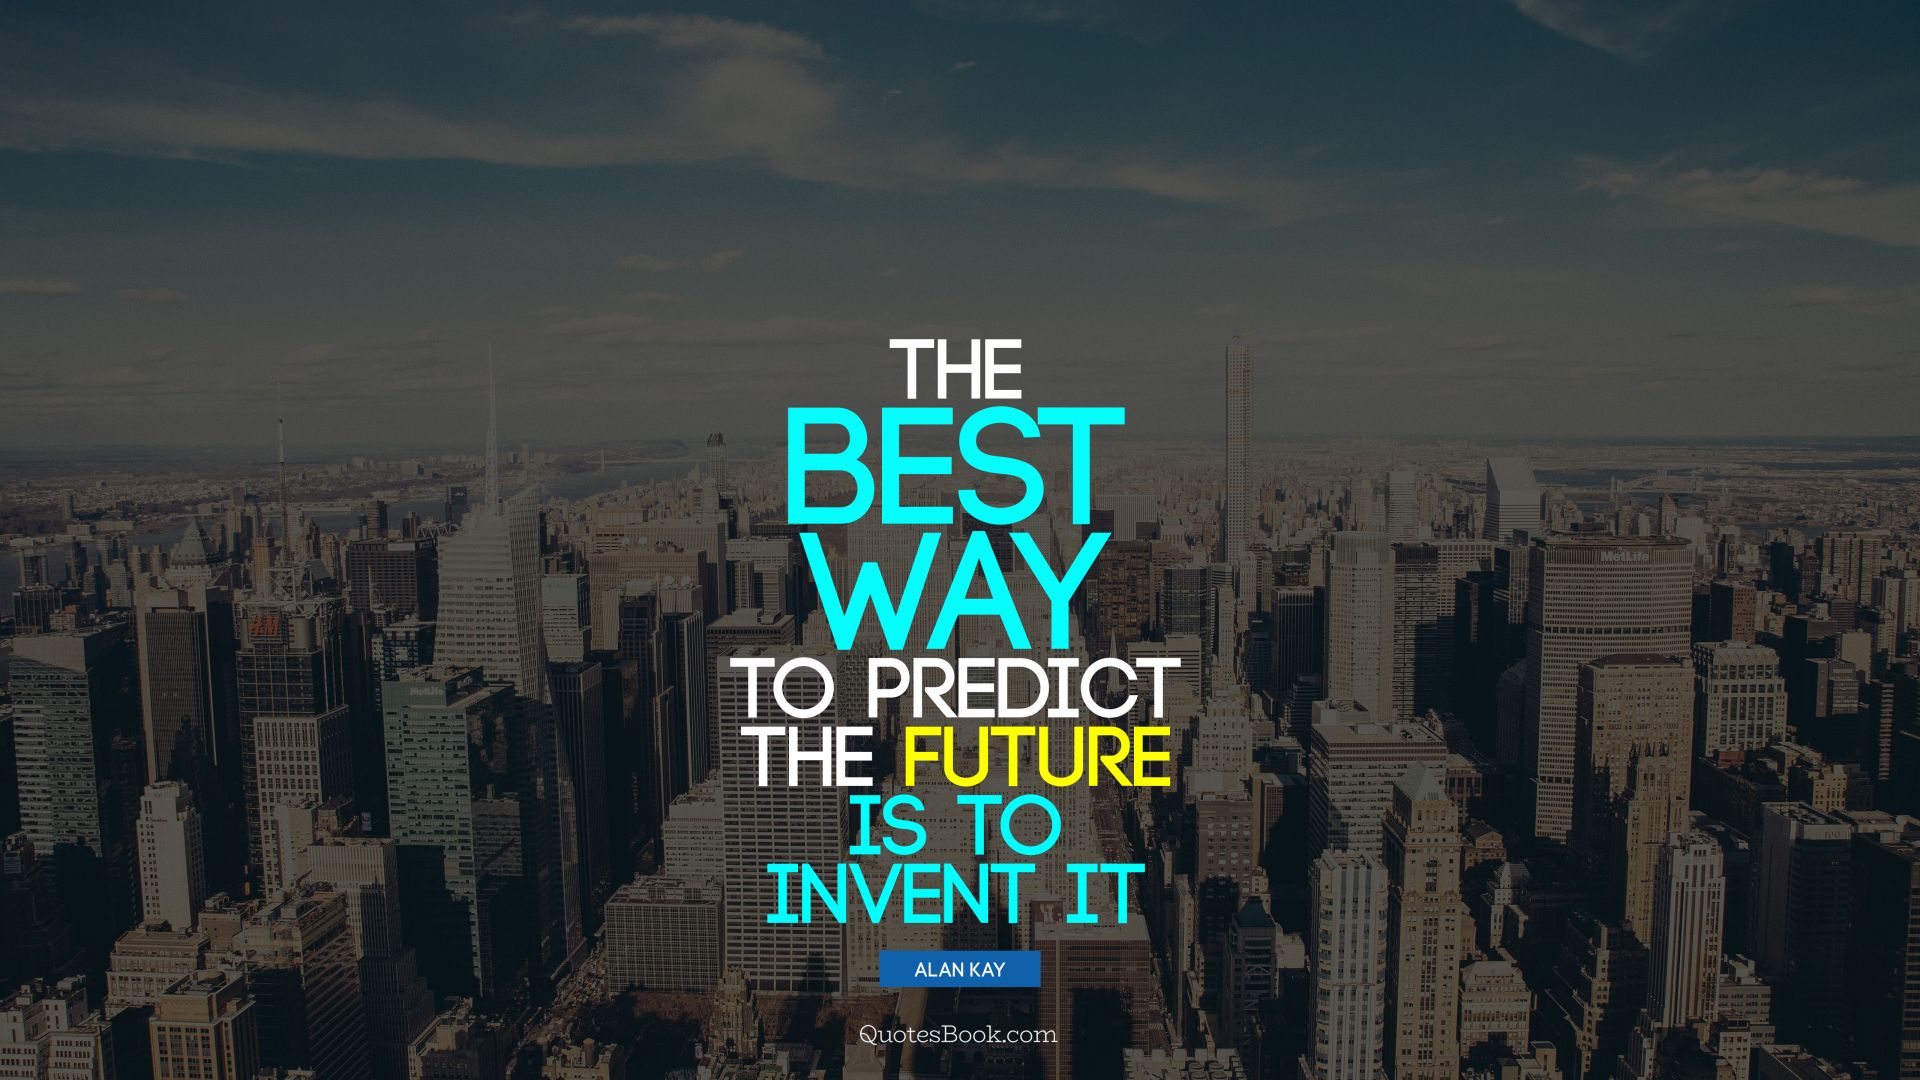 The best way to predict the future is to invent it. - Quote by Alan Kay